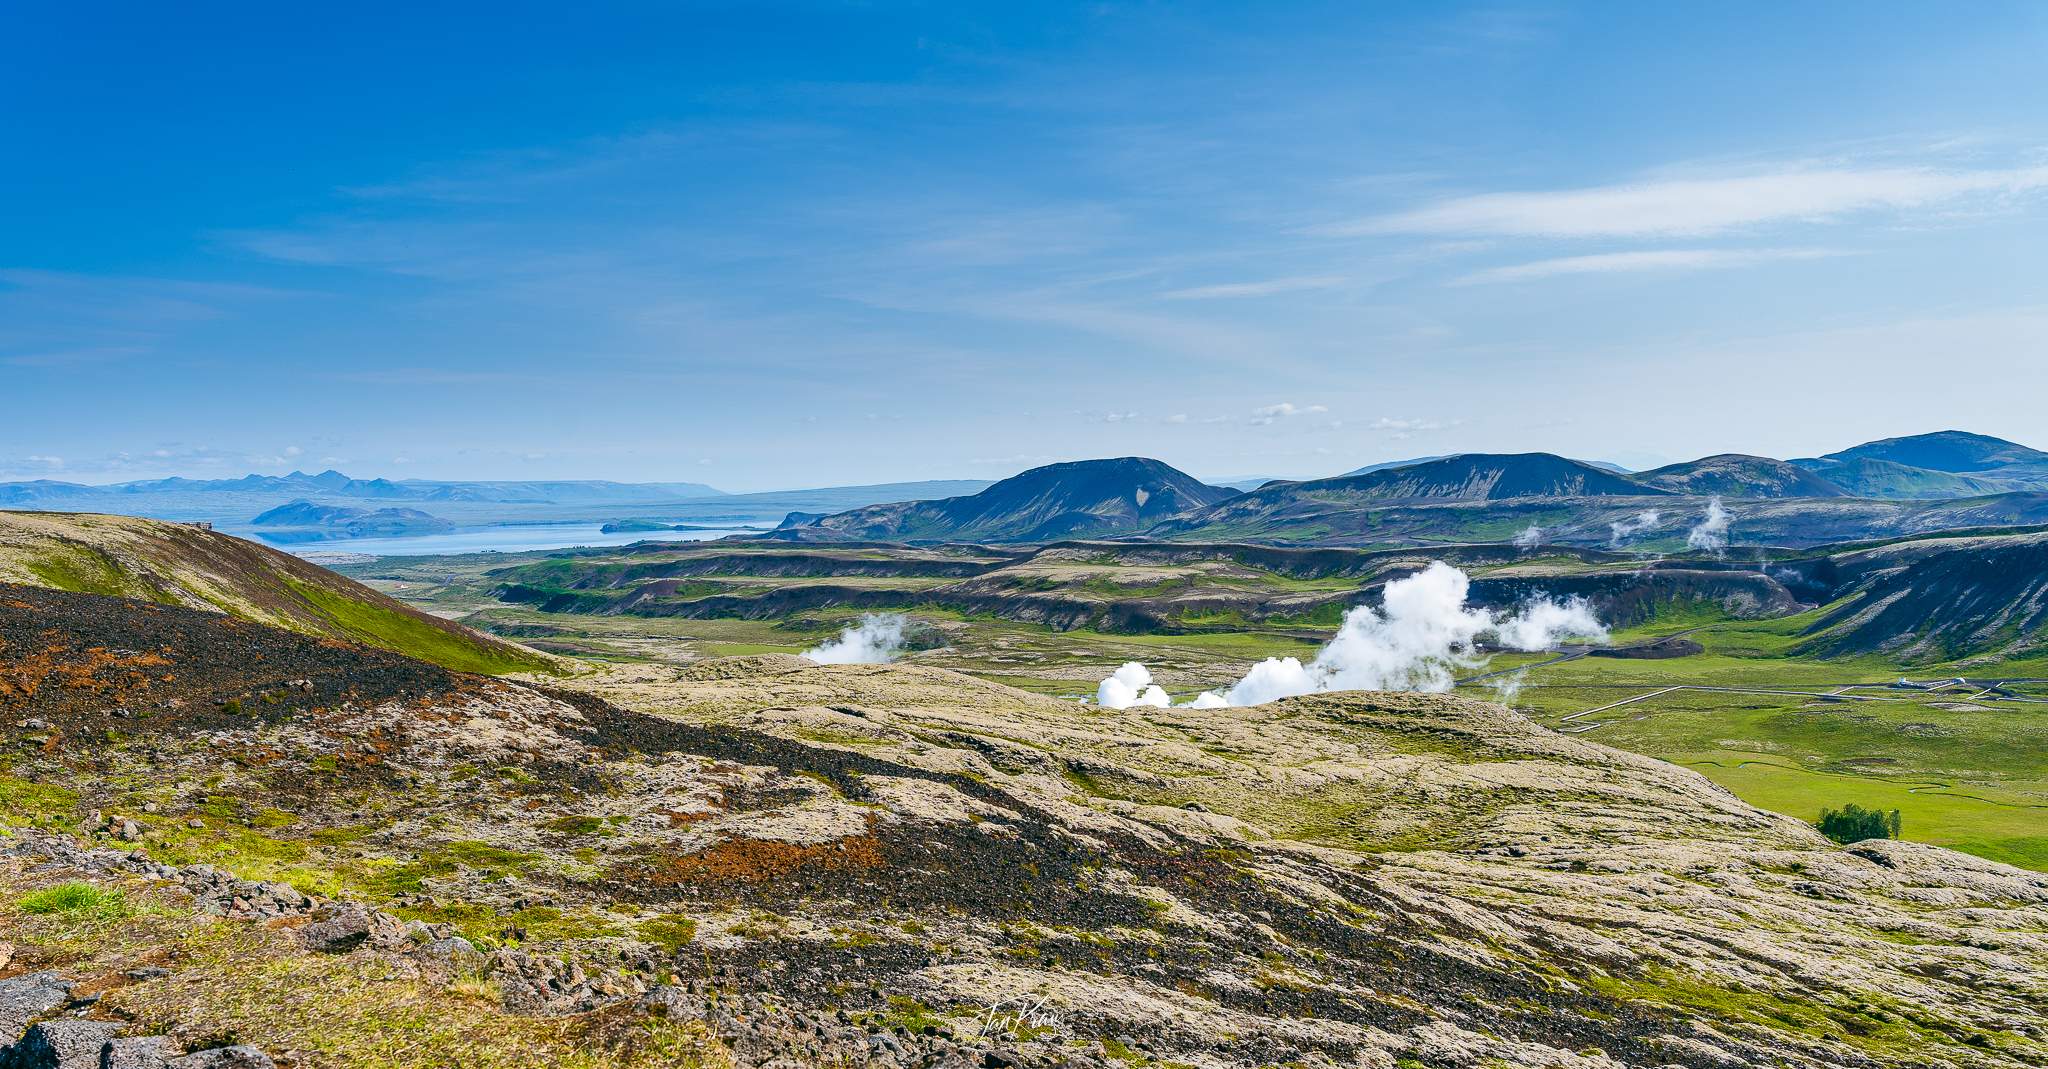 First encounter with geothermal activity, valley with steaming outlets, west of Reykjavík, Iceland